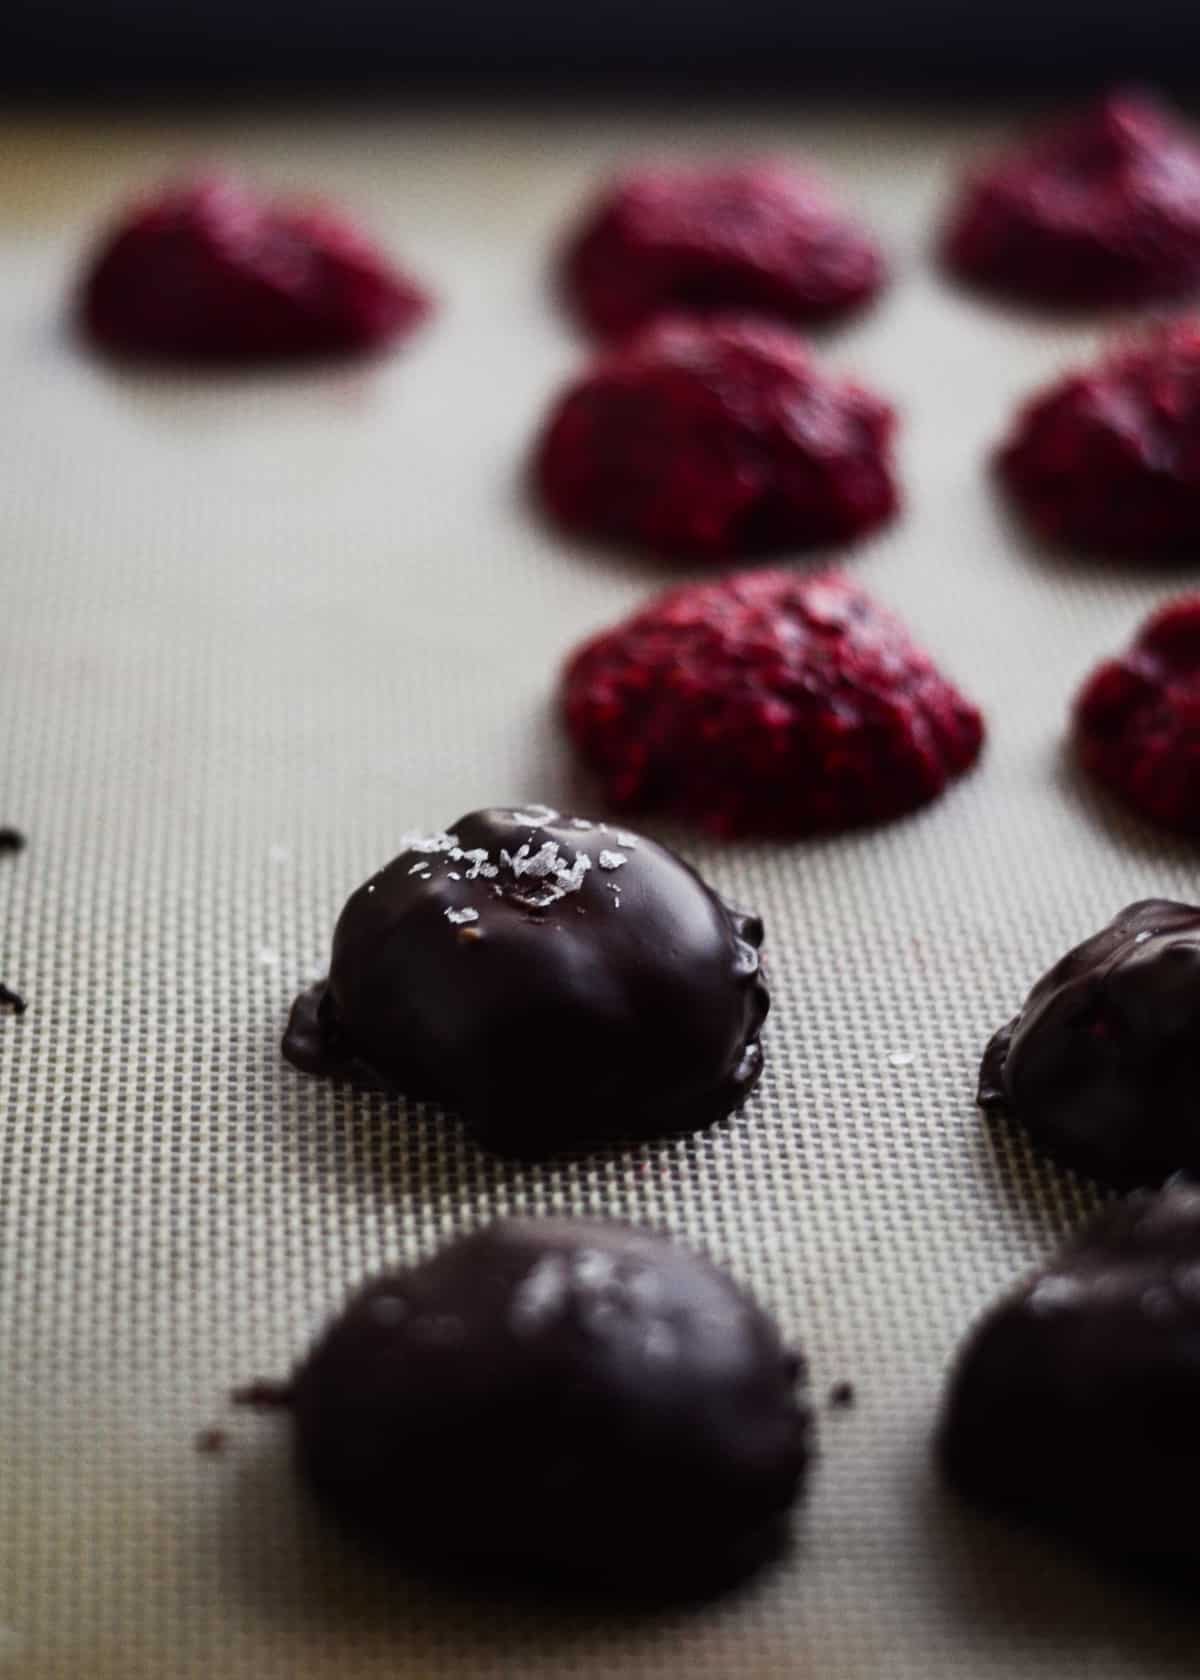 Raspberry chia jam mounds covered in dark chocolate with sea salt.